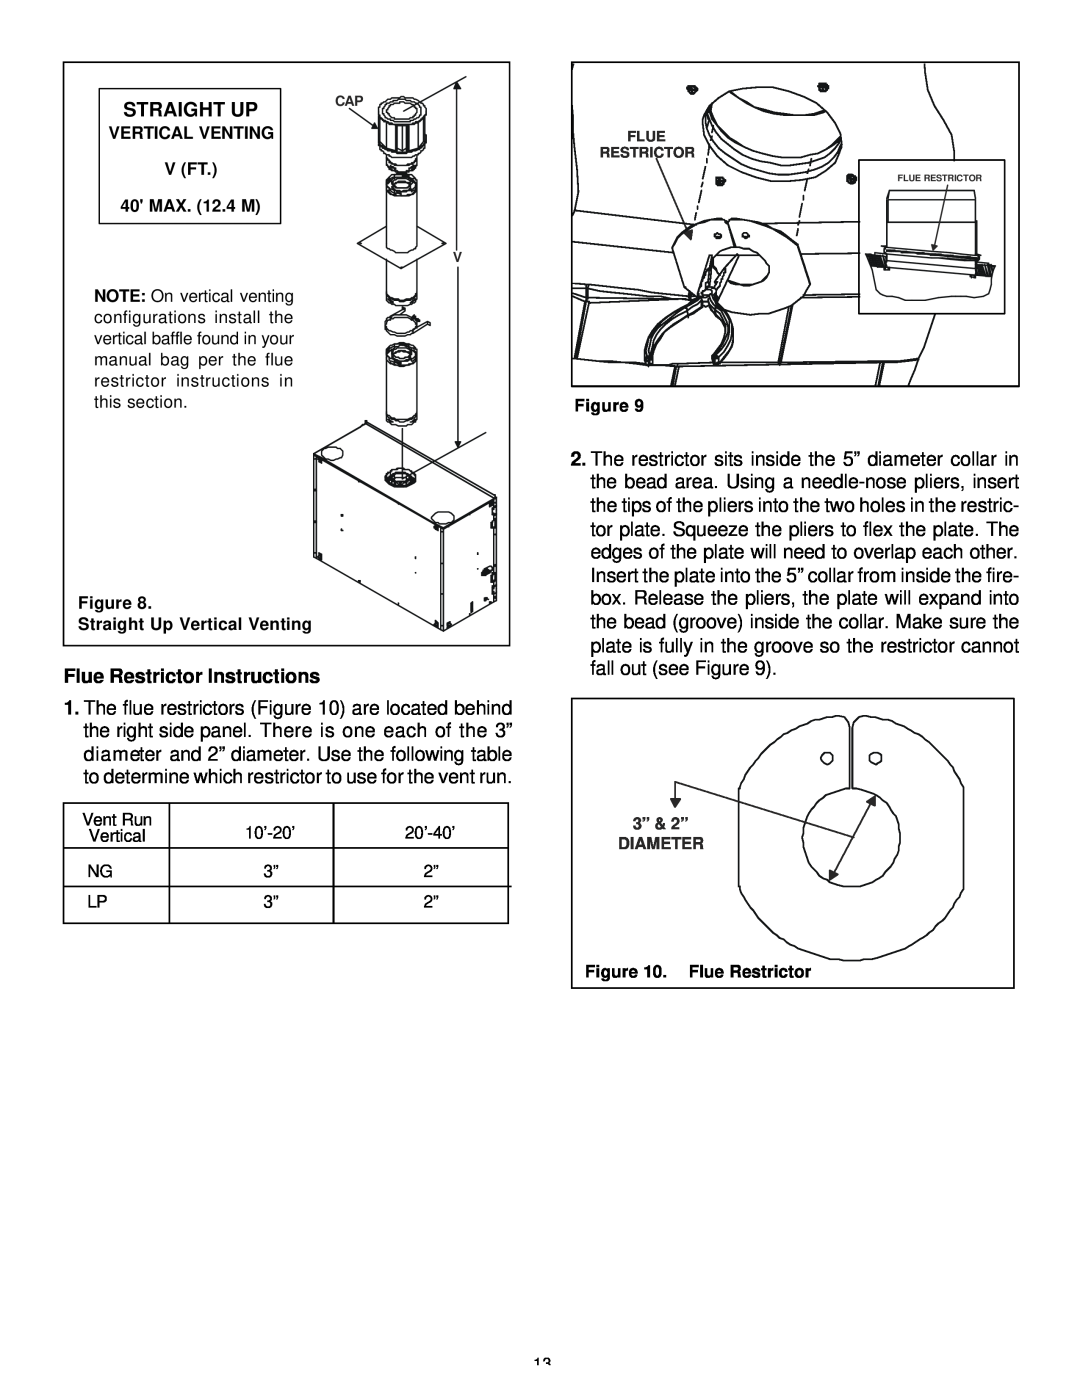 Heat & Glo LifeStyle 36DV manual Straight Up, Flue Restrictor Instructions 